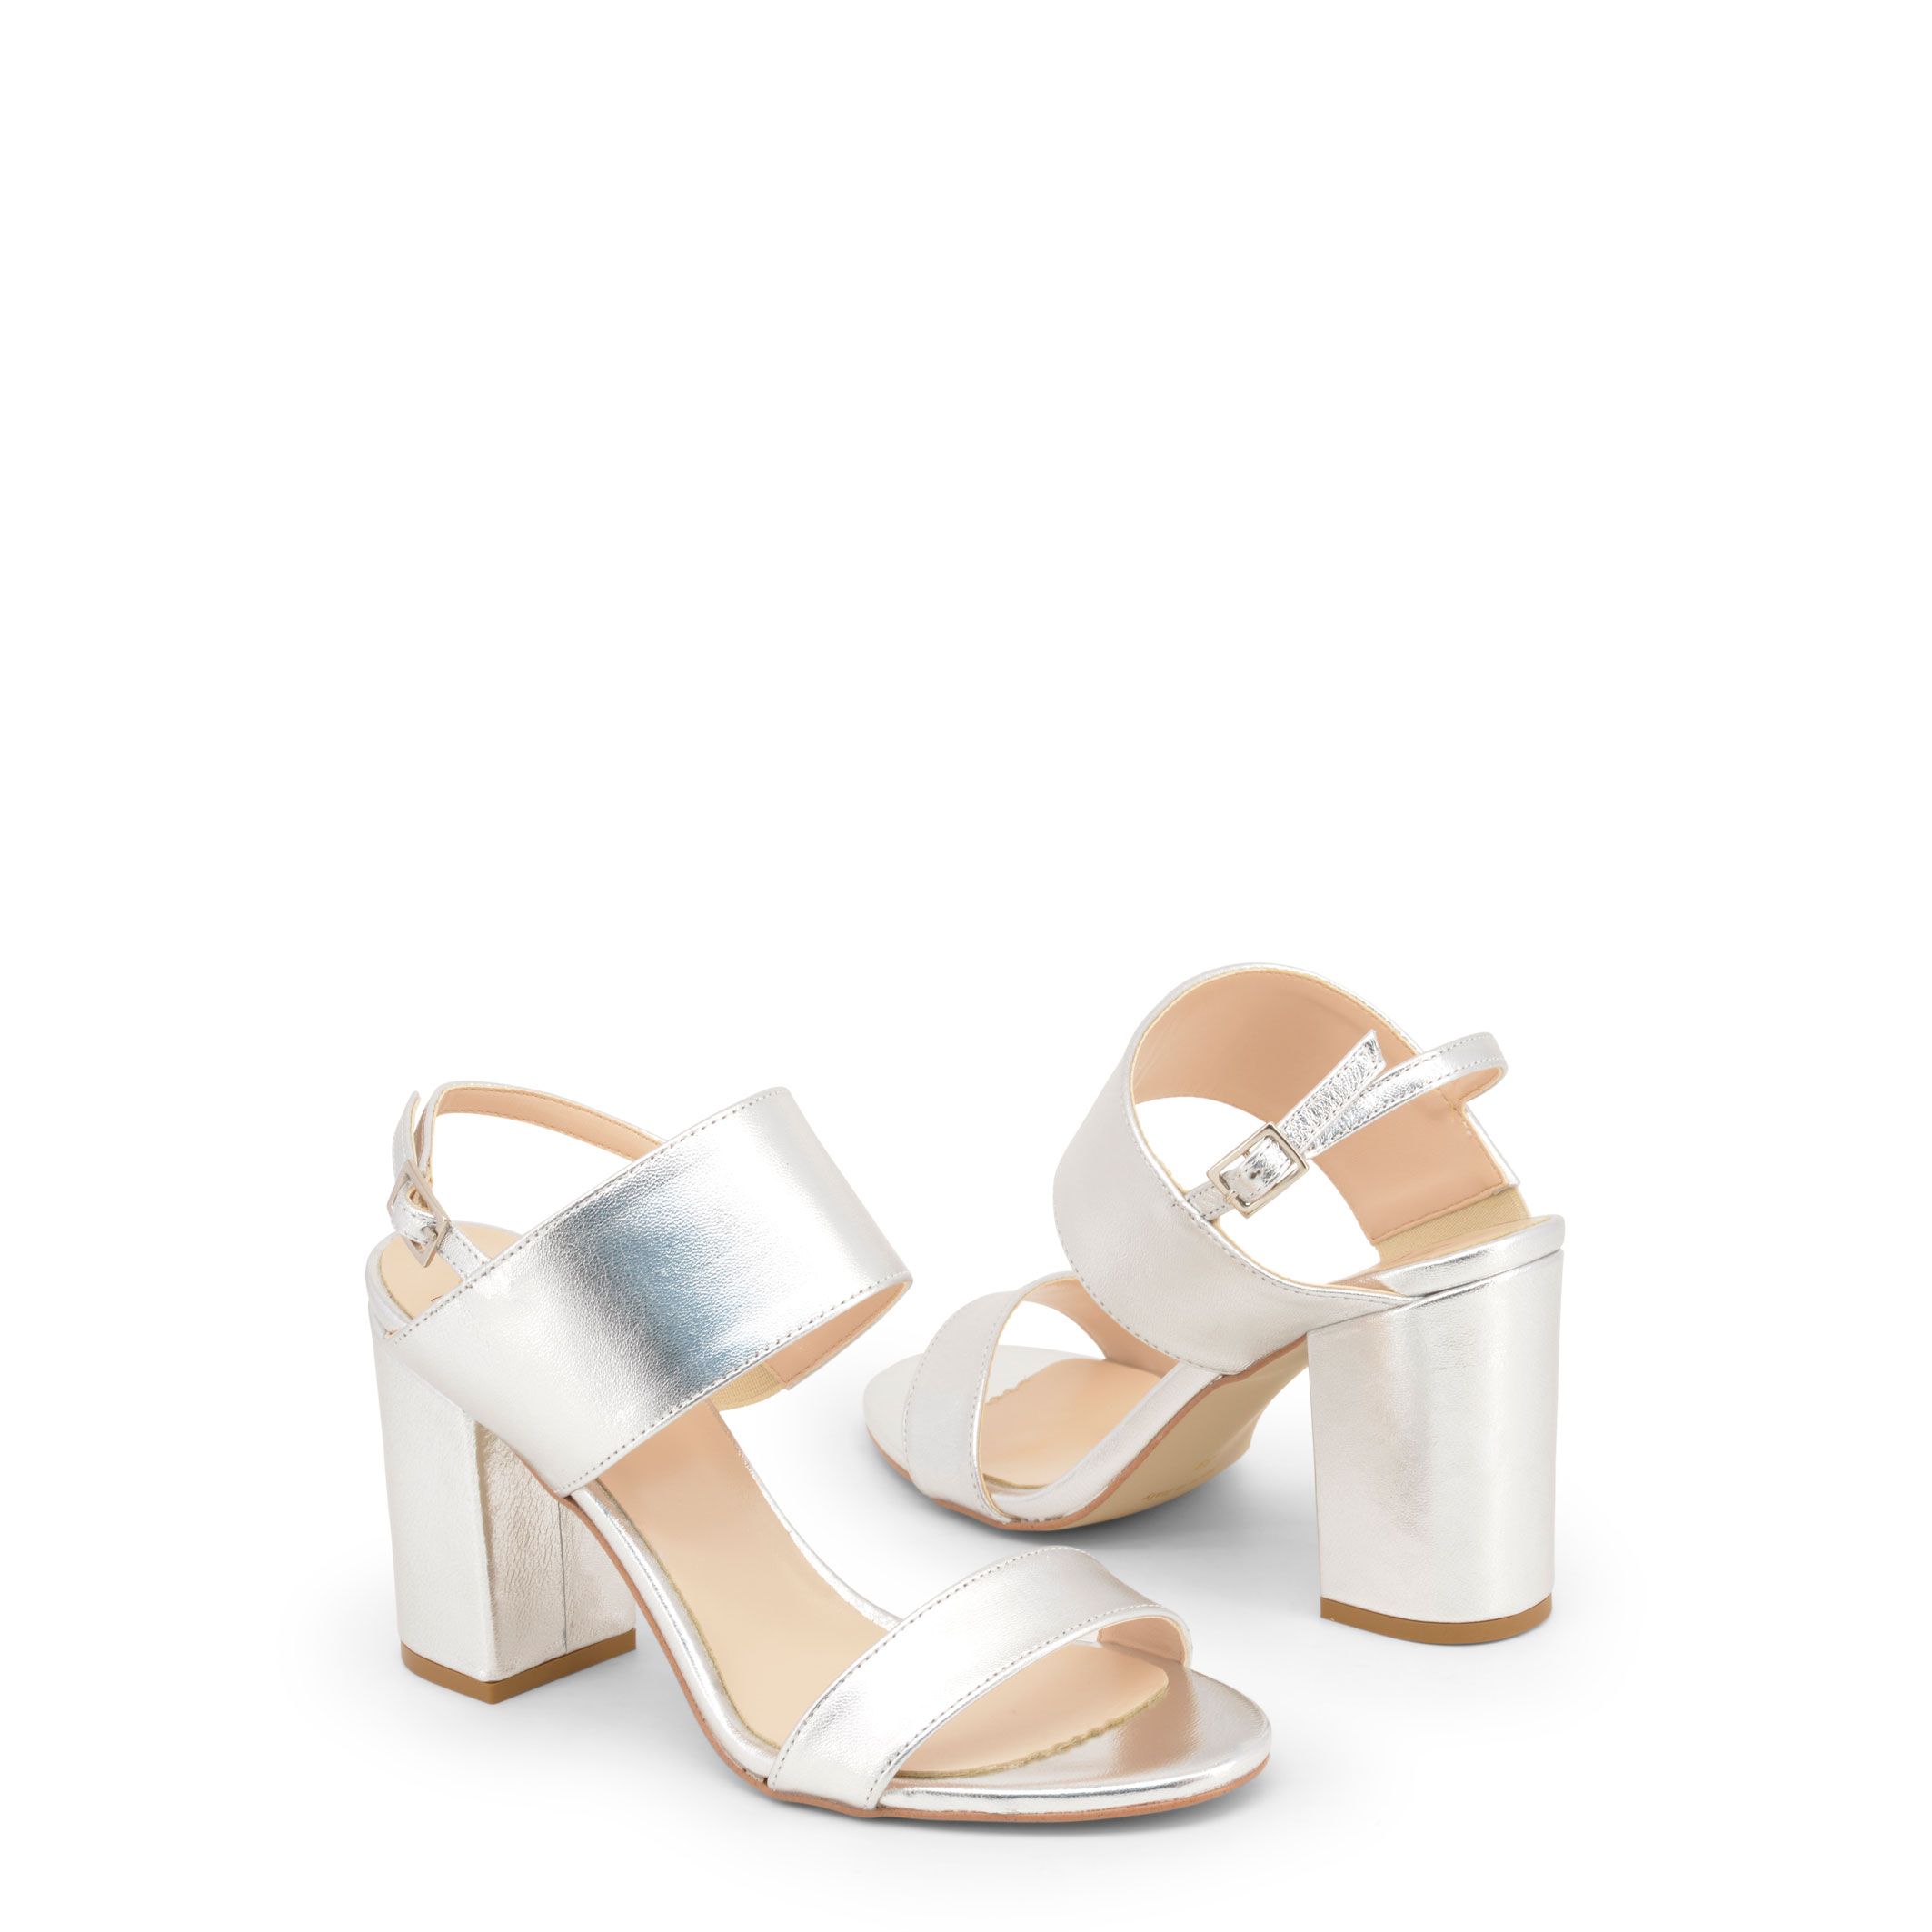 Made in: Italy <br> Collection: Spring/Summer <br> Gender: Woman <br> Type: Sandals <br> Upper: leather <br> Insole: leather <br> Sole: tunit <br> Heel height cm: 9.5 <br> Platform height cm: undefined <br> Details: ankle strap, buckle